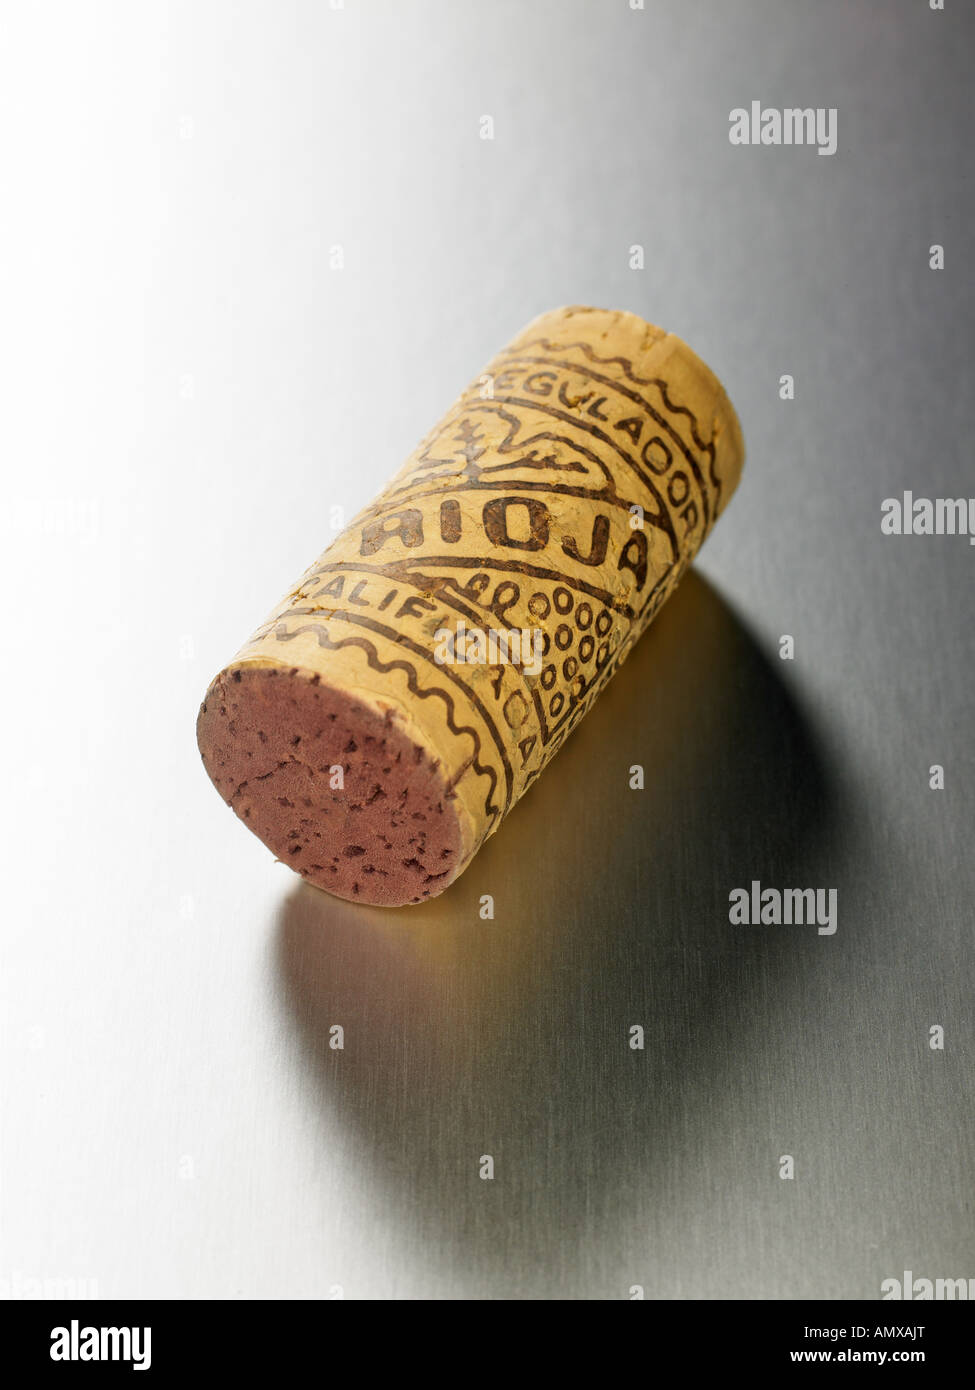 Rioja wine cork on silver surface with shadow. Stock Photo